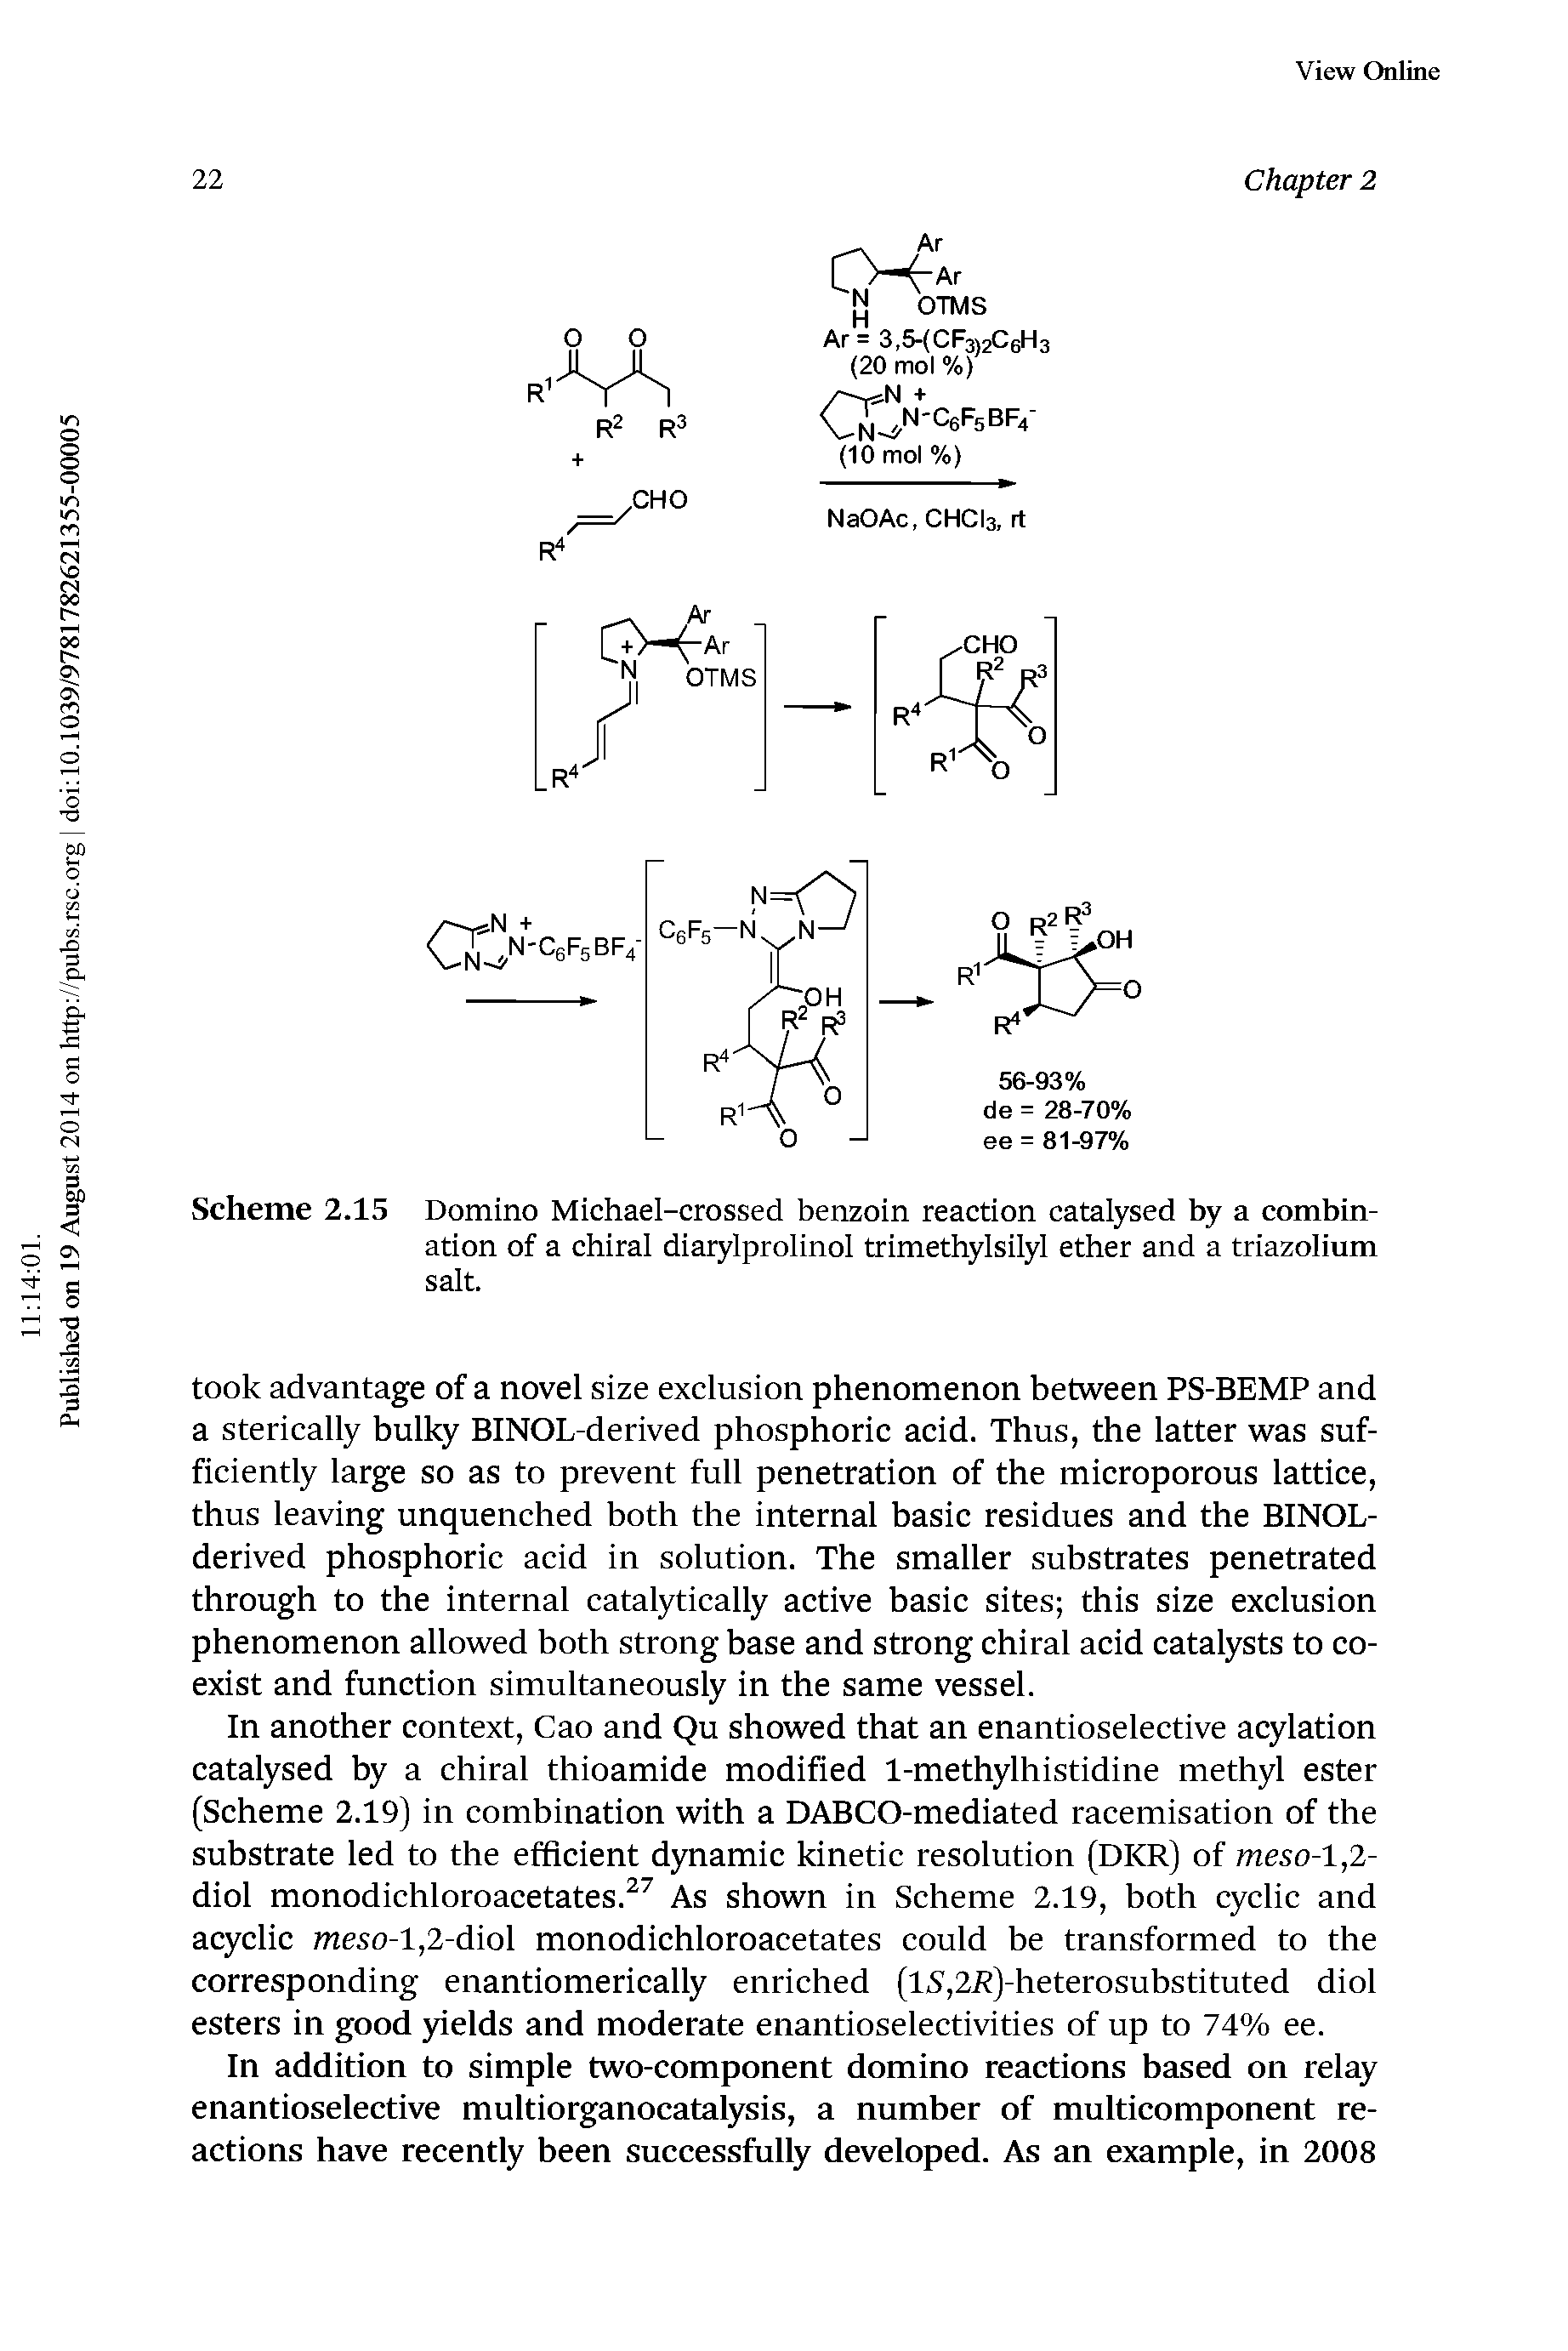 Scheme 2.15 Domino Michael-crossed benzoin reaction catalysed by a combination of a chiral diarylprolinol trimethylsilyl ether and a triazolium salt.